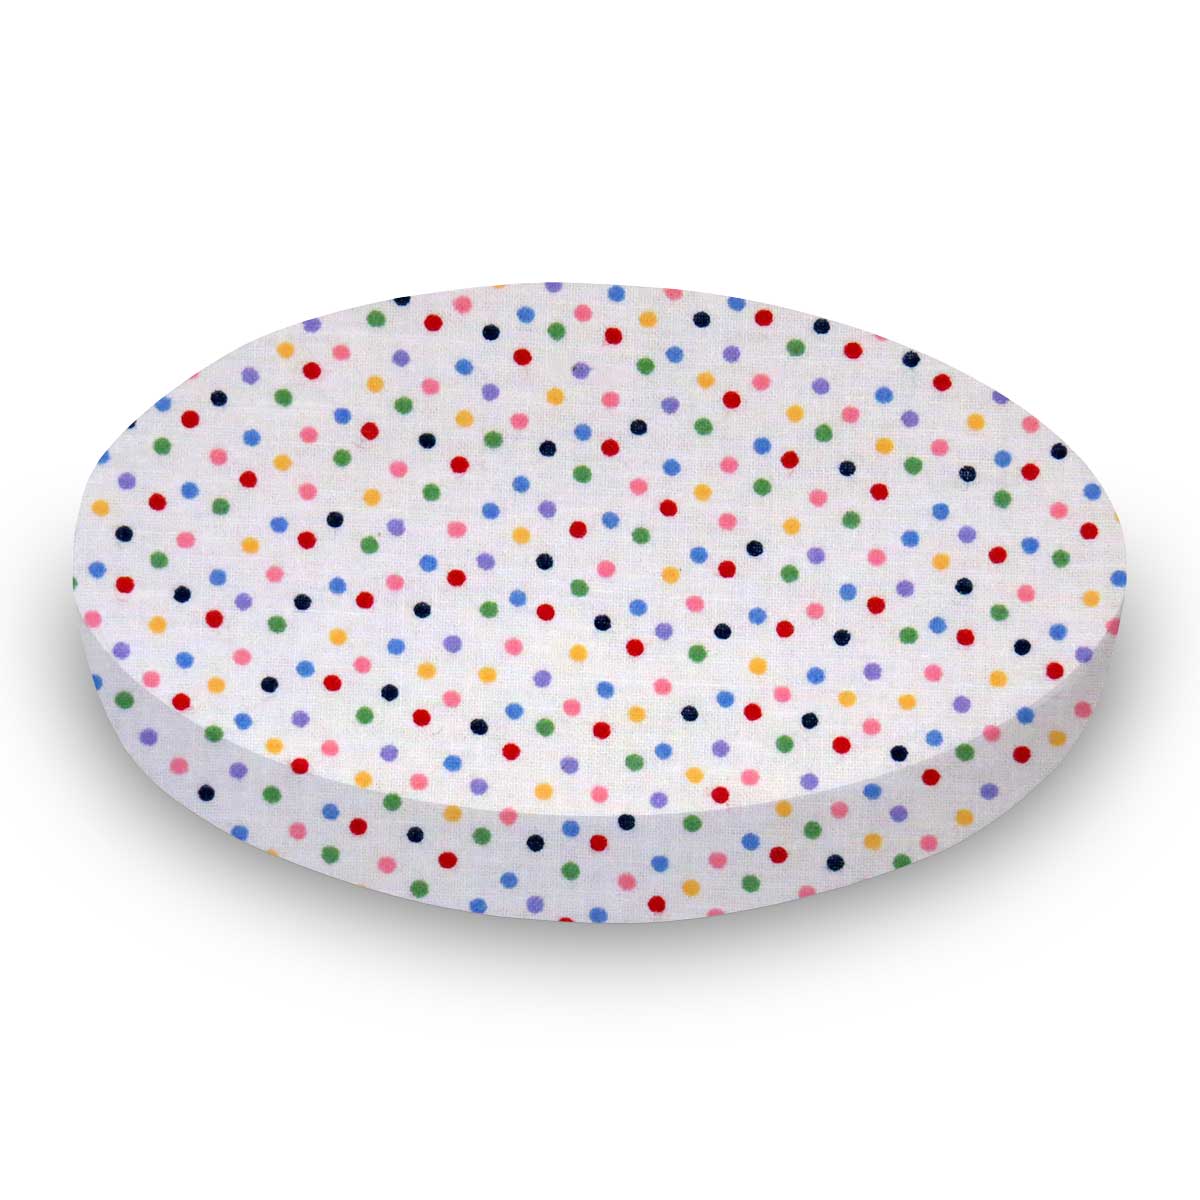 Oval Crib (Stokke Sleepi) - Colorful Pindots - Fitted  Oval